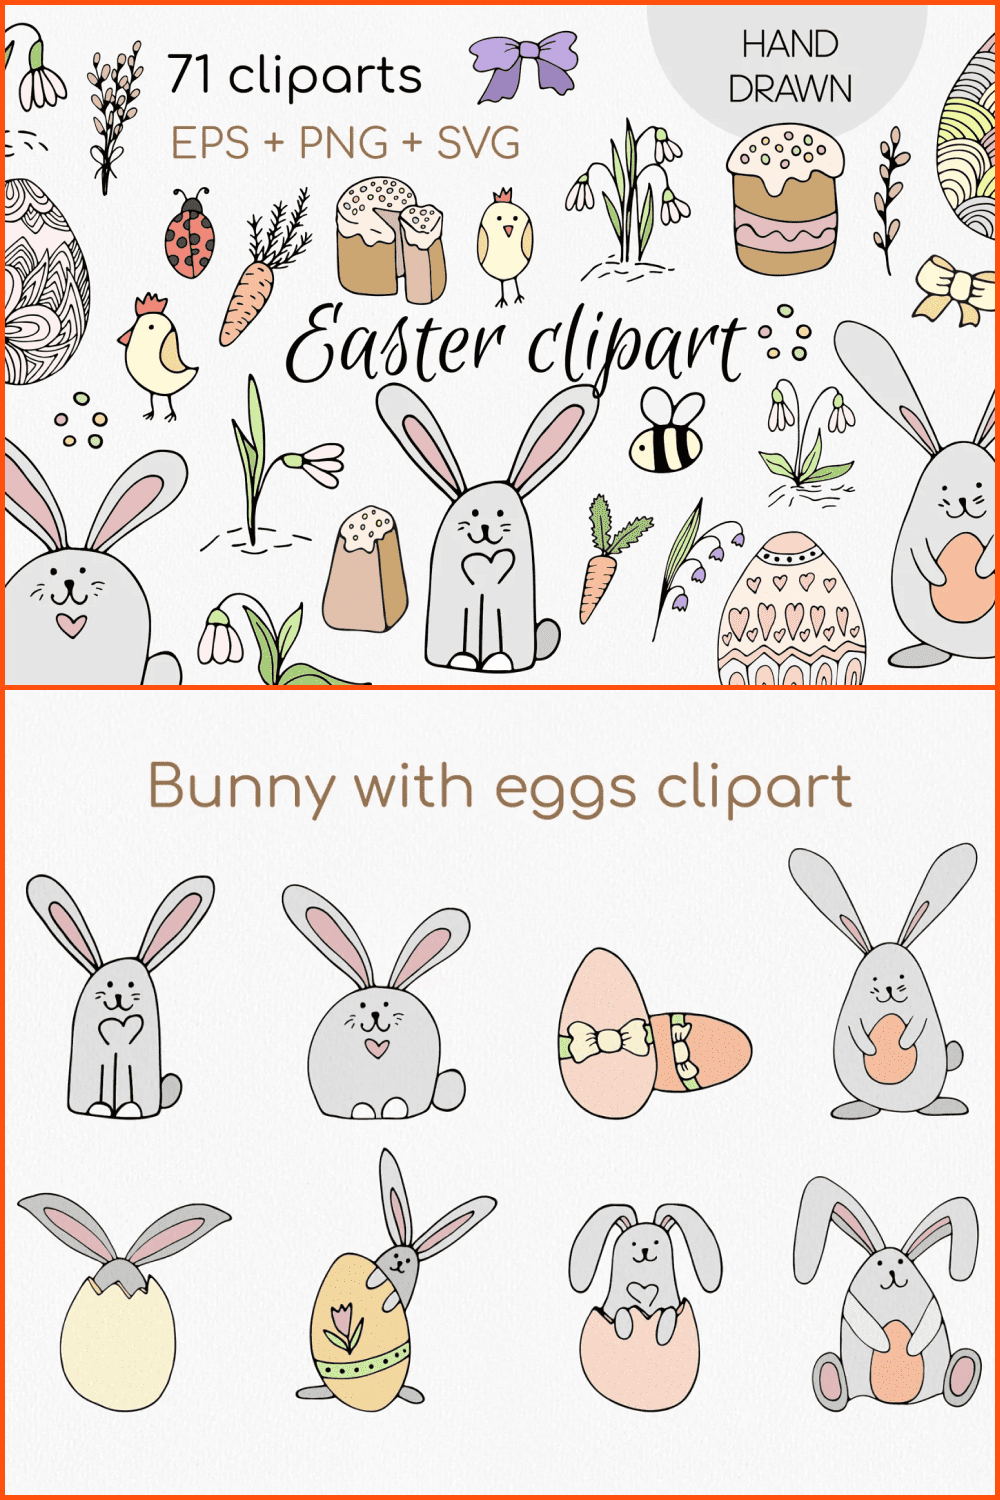 Easter clipart Doodle.